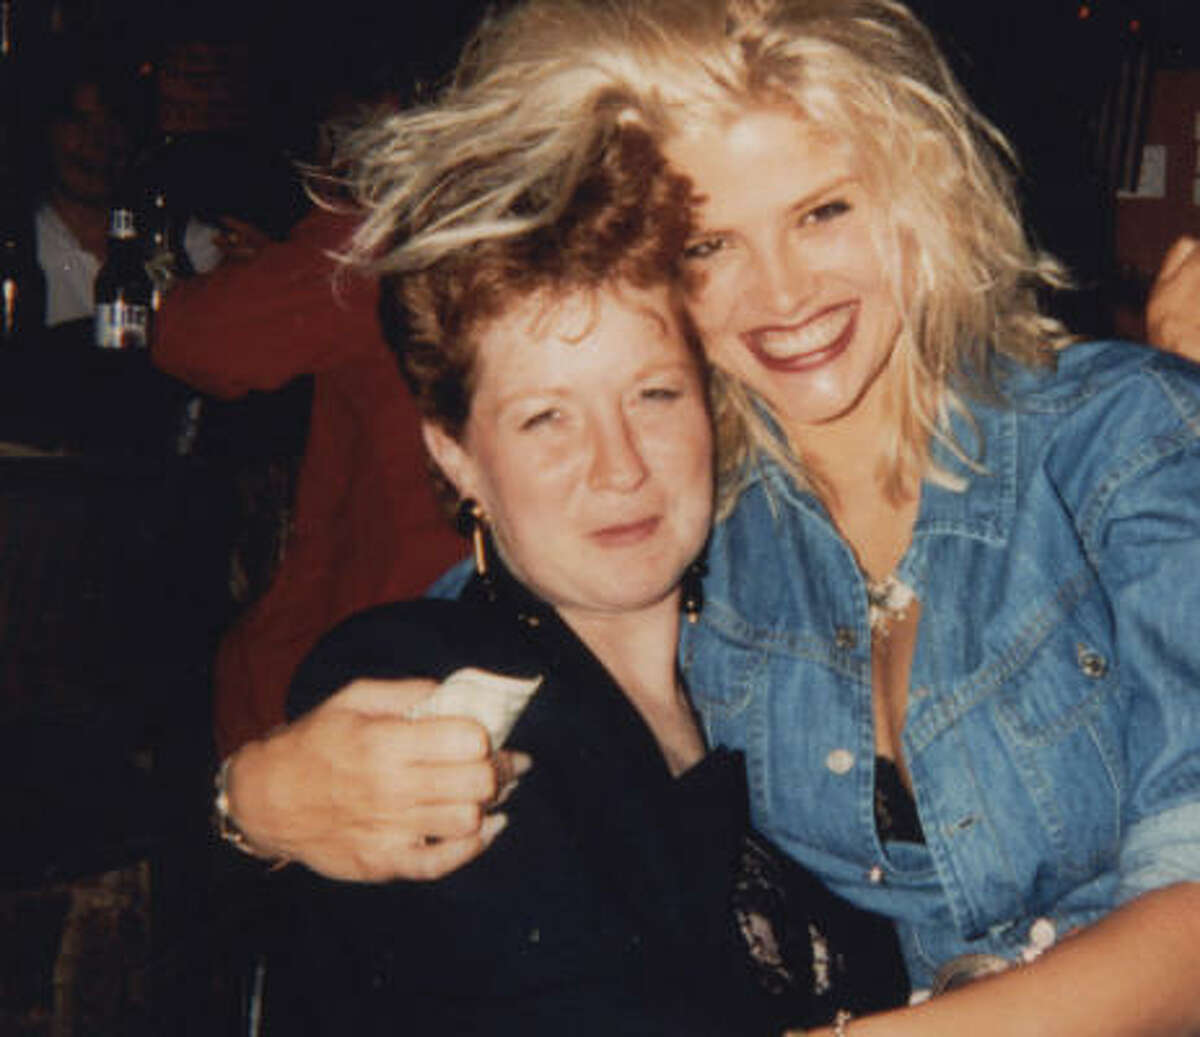 Vickie Lynn Hogan sits on Sandi Powlege's lap during their "first date" at The Hill, a bar on Kuykendahl, in Houston, in 1991.